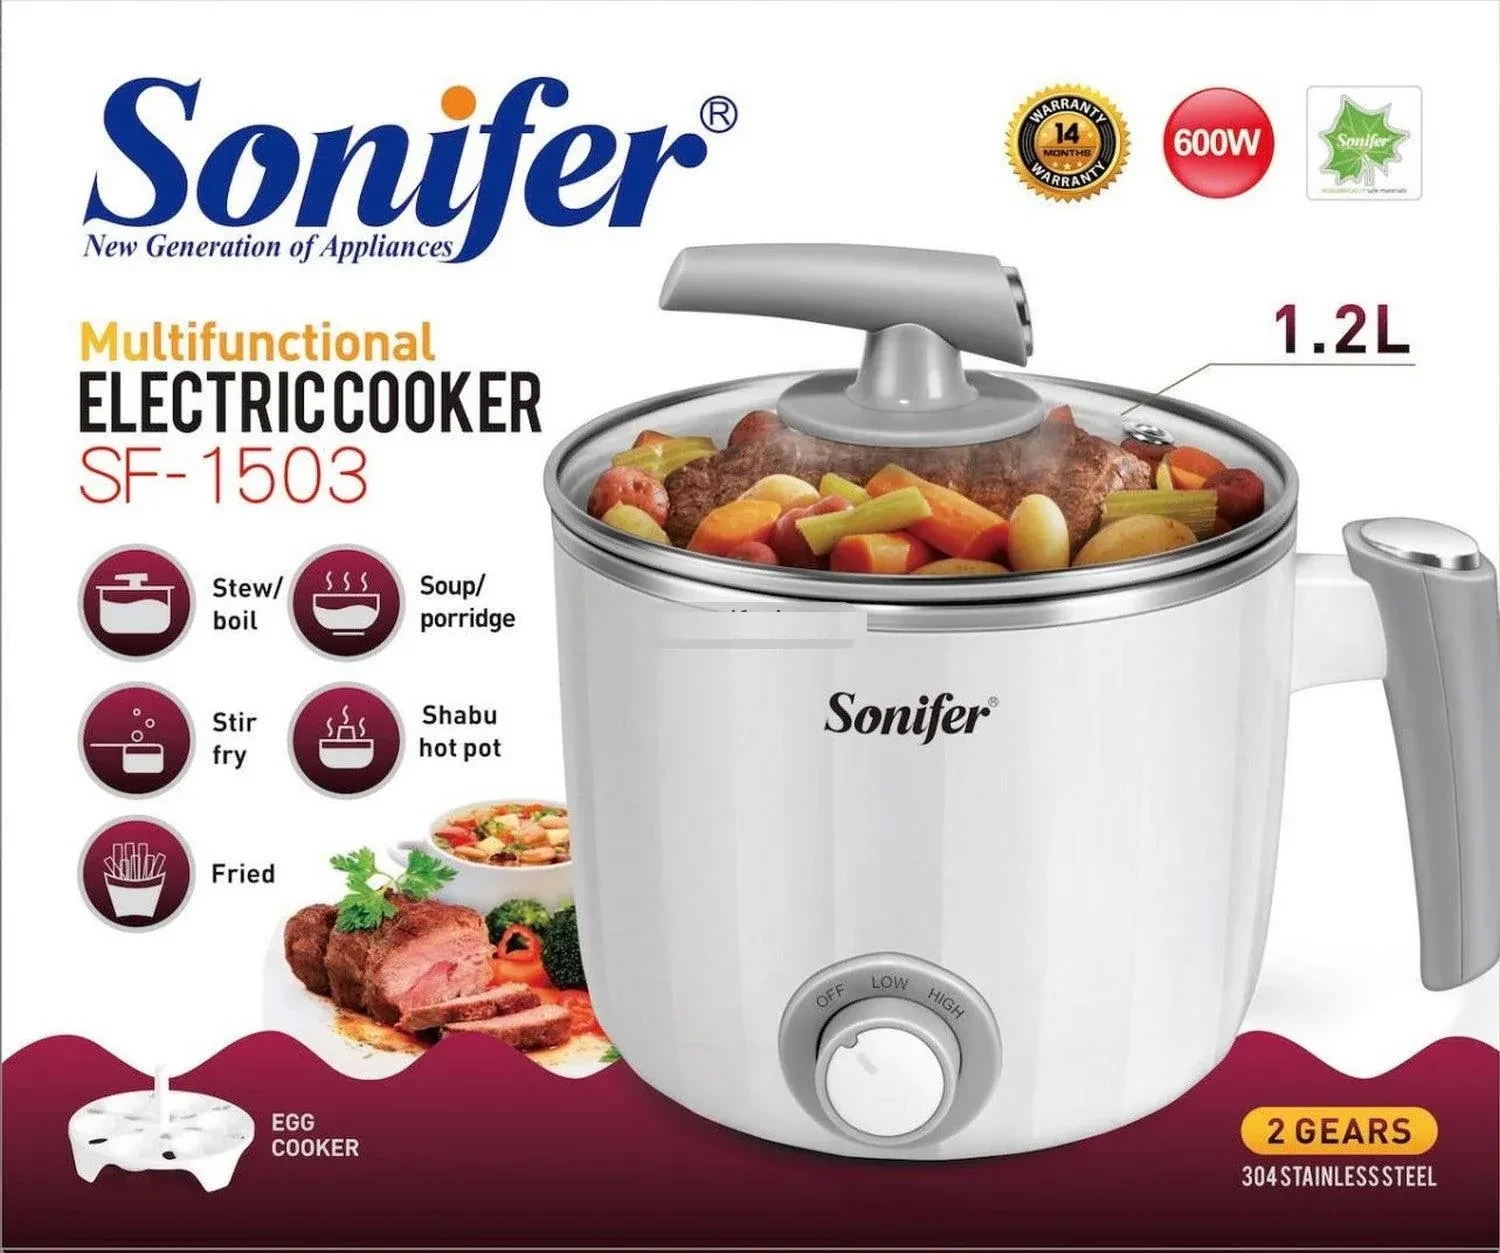 Sonifer SF-1503 Multifunctional Electric Cooker – 1.2L, White Color